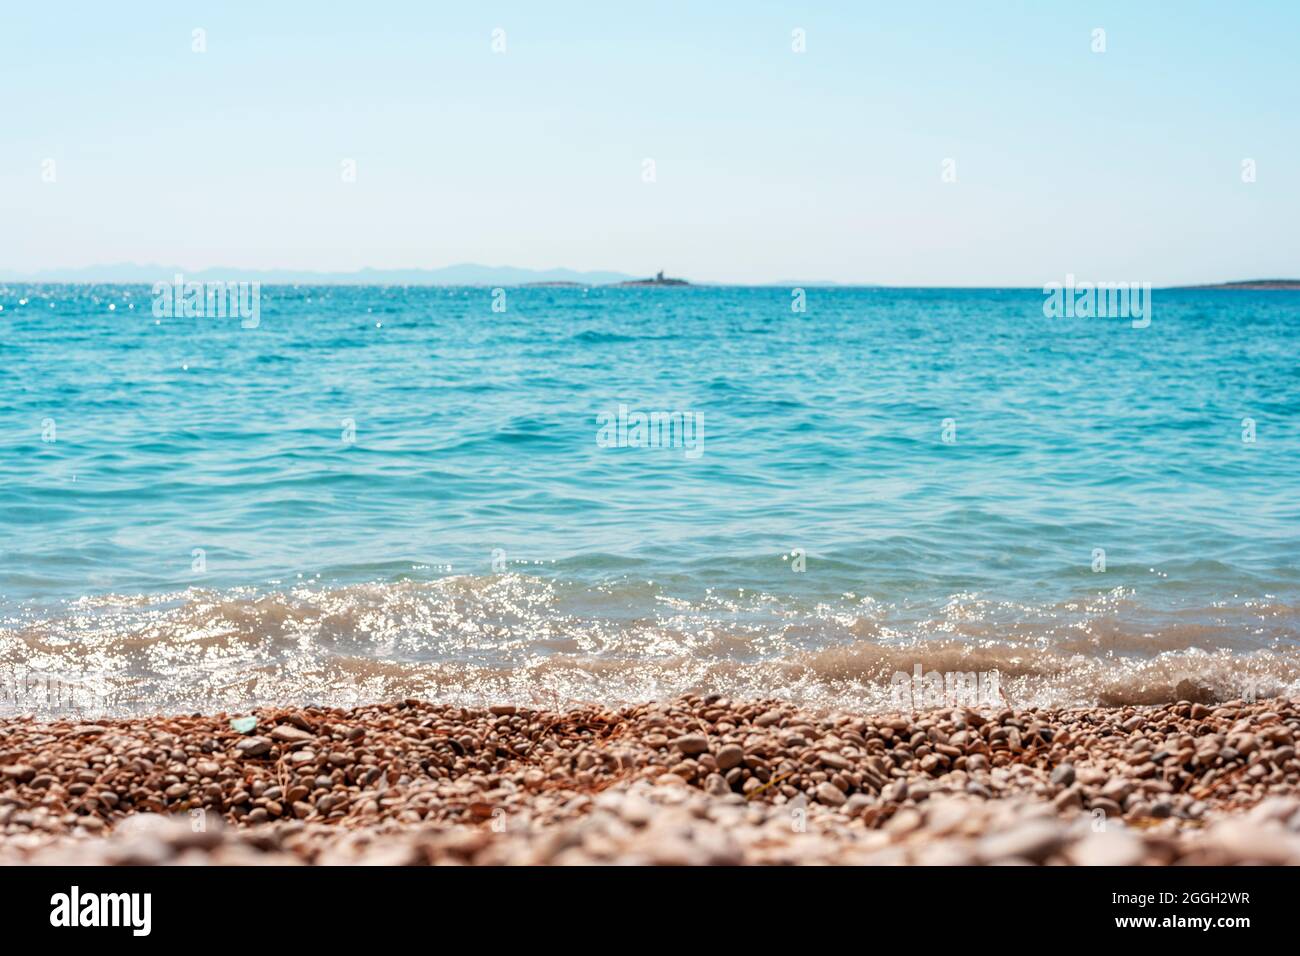 Beautiful pebble beach and blue sea with islands. Shallow depth of field. Stock Photo